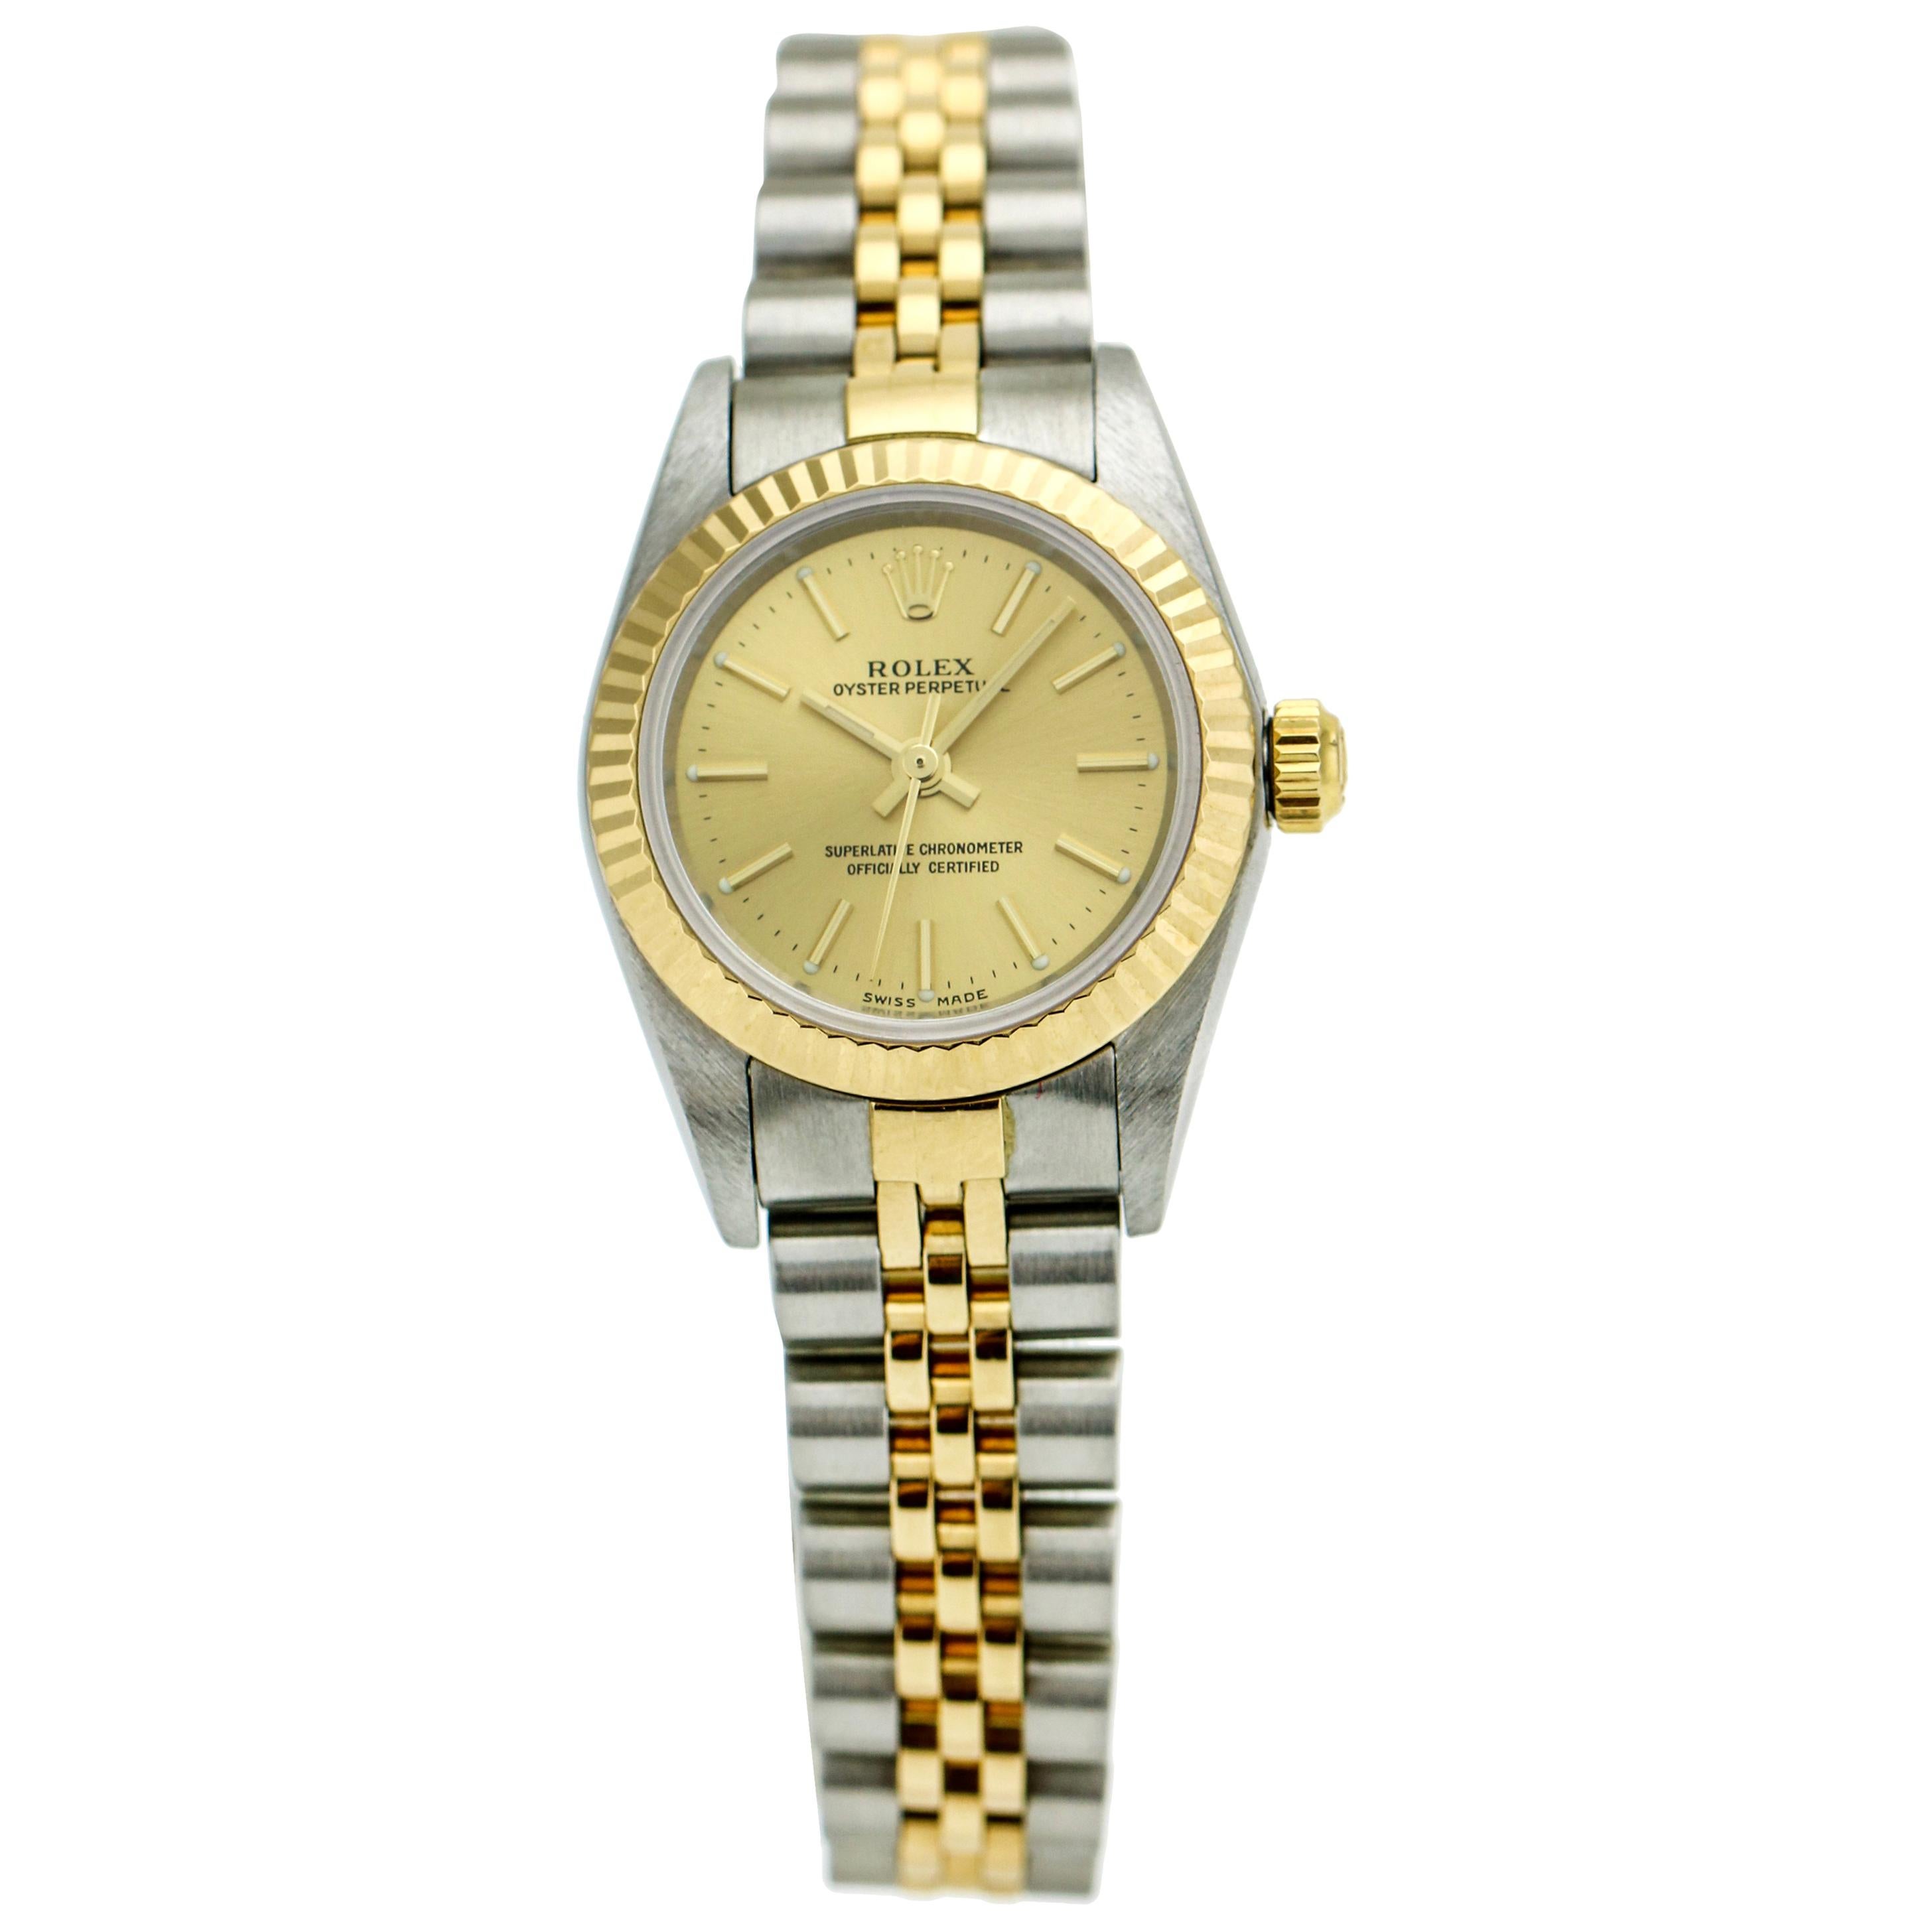 Rolex Lady Oyster Perpetual 76193 18 Karat Gold Stainless Steel Automatic Watch For Sale